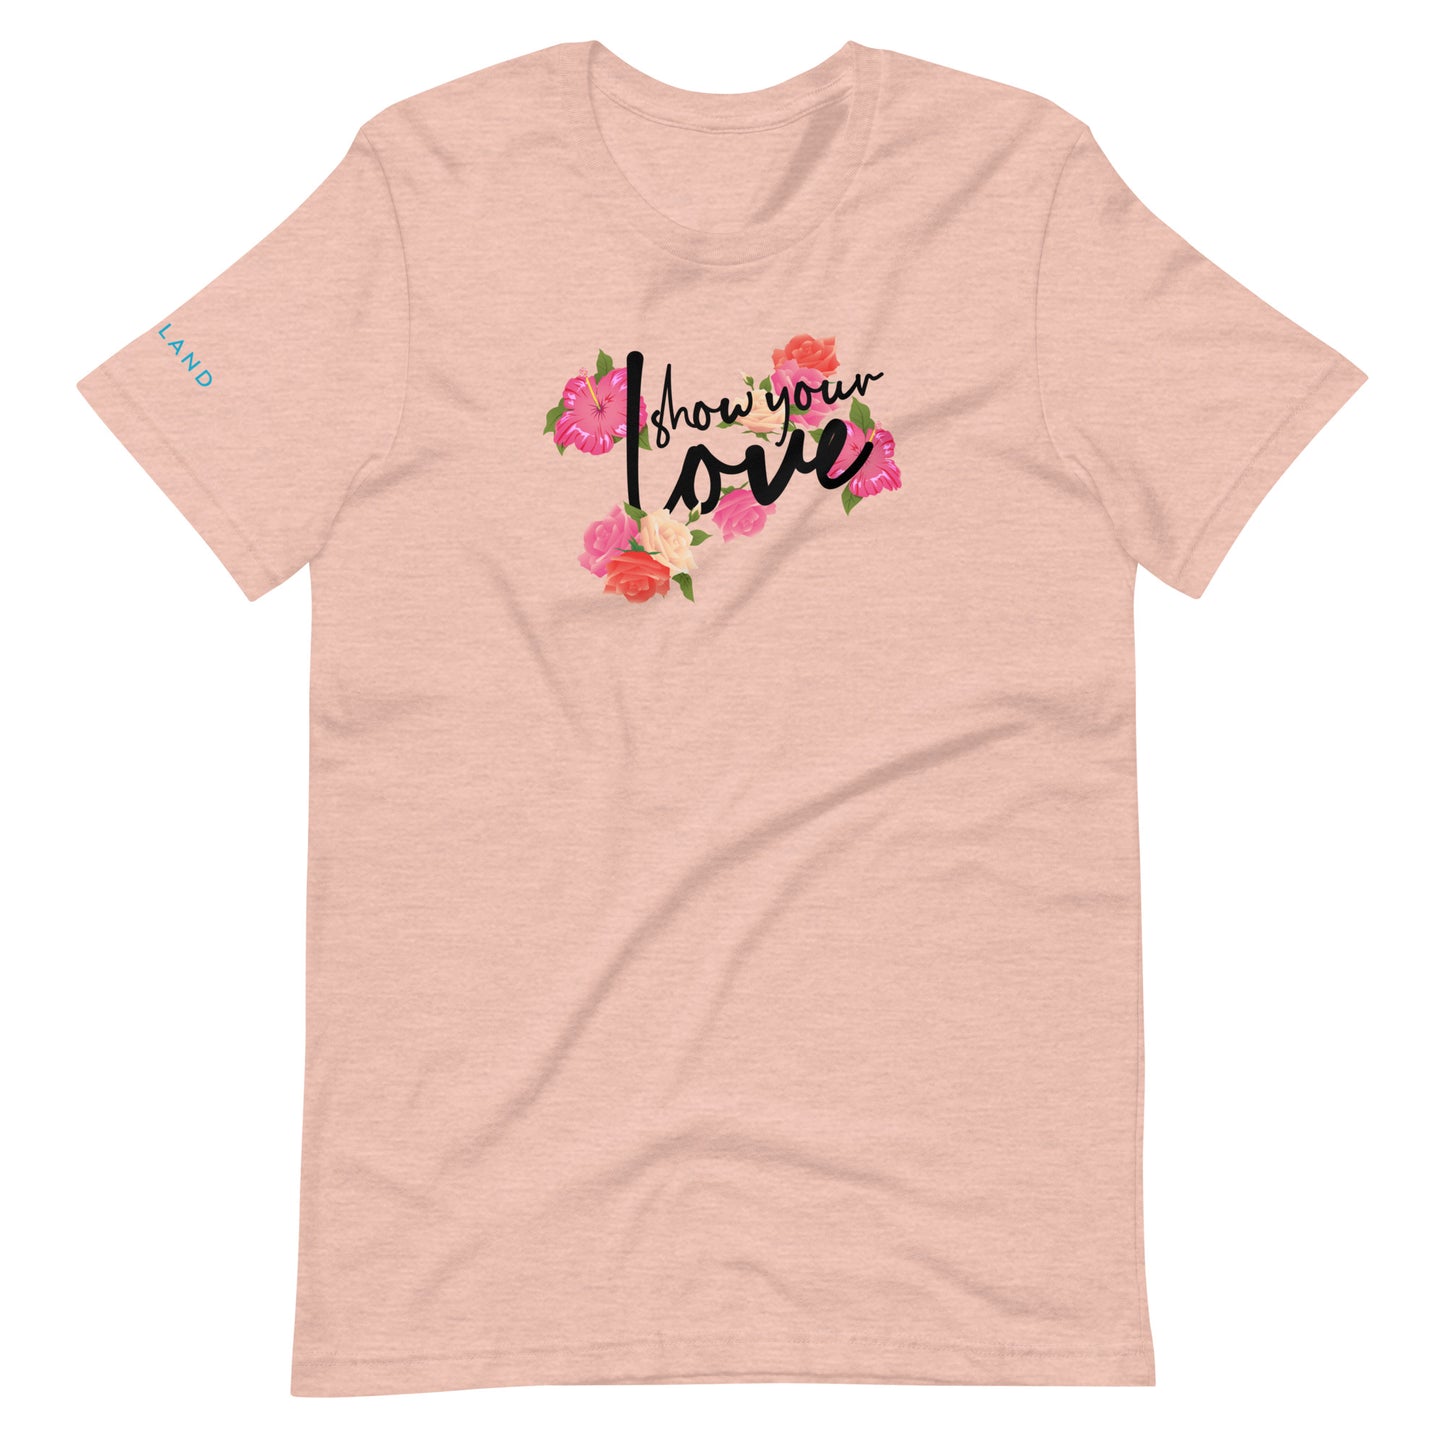 Show Your Love Through the Flowers Unisex t-shirt